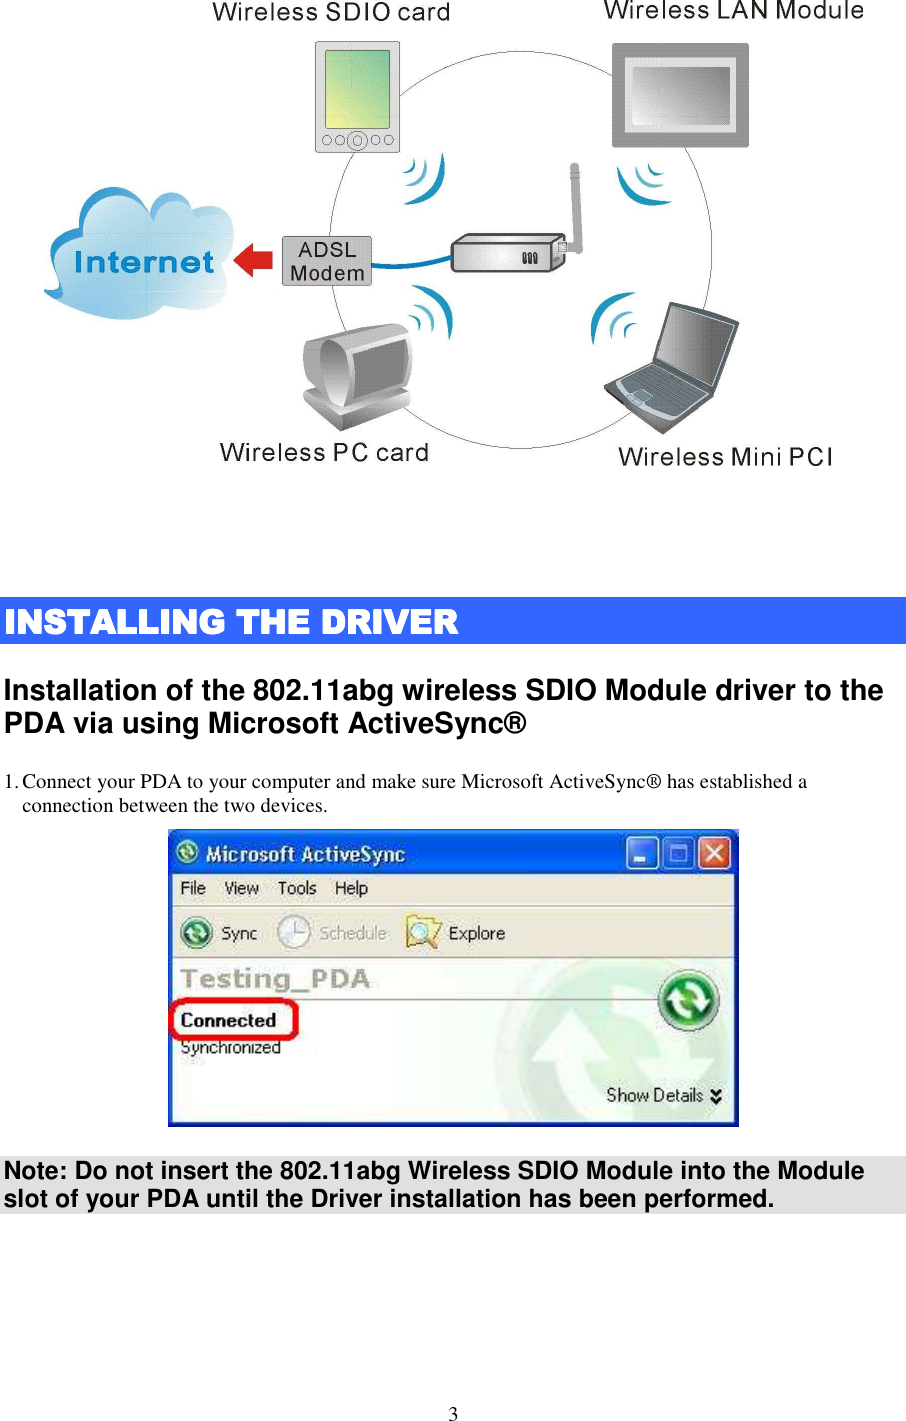   3    INSTALLING THE DRIVEINSTALLING THE DRIVEINSTALLING THE DRIVEINSTALLING THE DRIVERRRR    Installation of the 802.11abg wireless SDIO Module driver to the PDA via using Microsoft ActiveSync®   1. Connect your PDA to your computer and make sure Microsoft ActiveSync® has established a connection between the two devices.  Note: Do not insert the 802.11abg Wireless SDIO Module into the Module slot of your PDA until the Driver installation has been performed.     